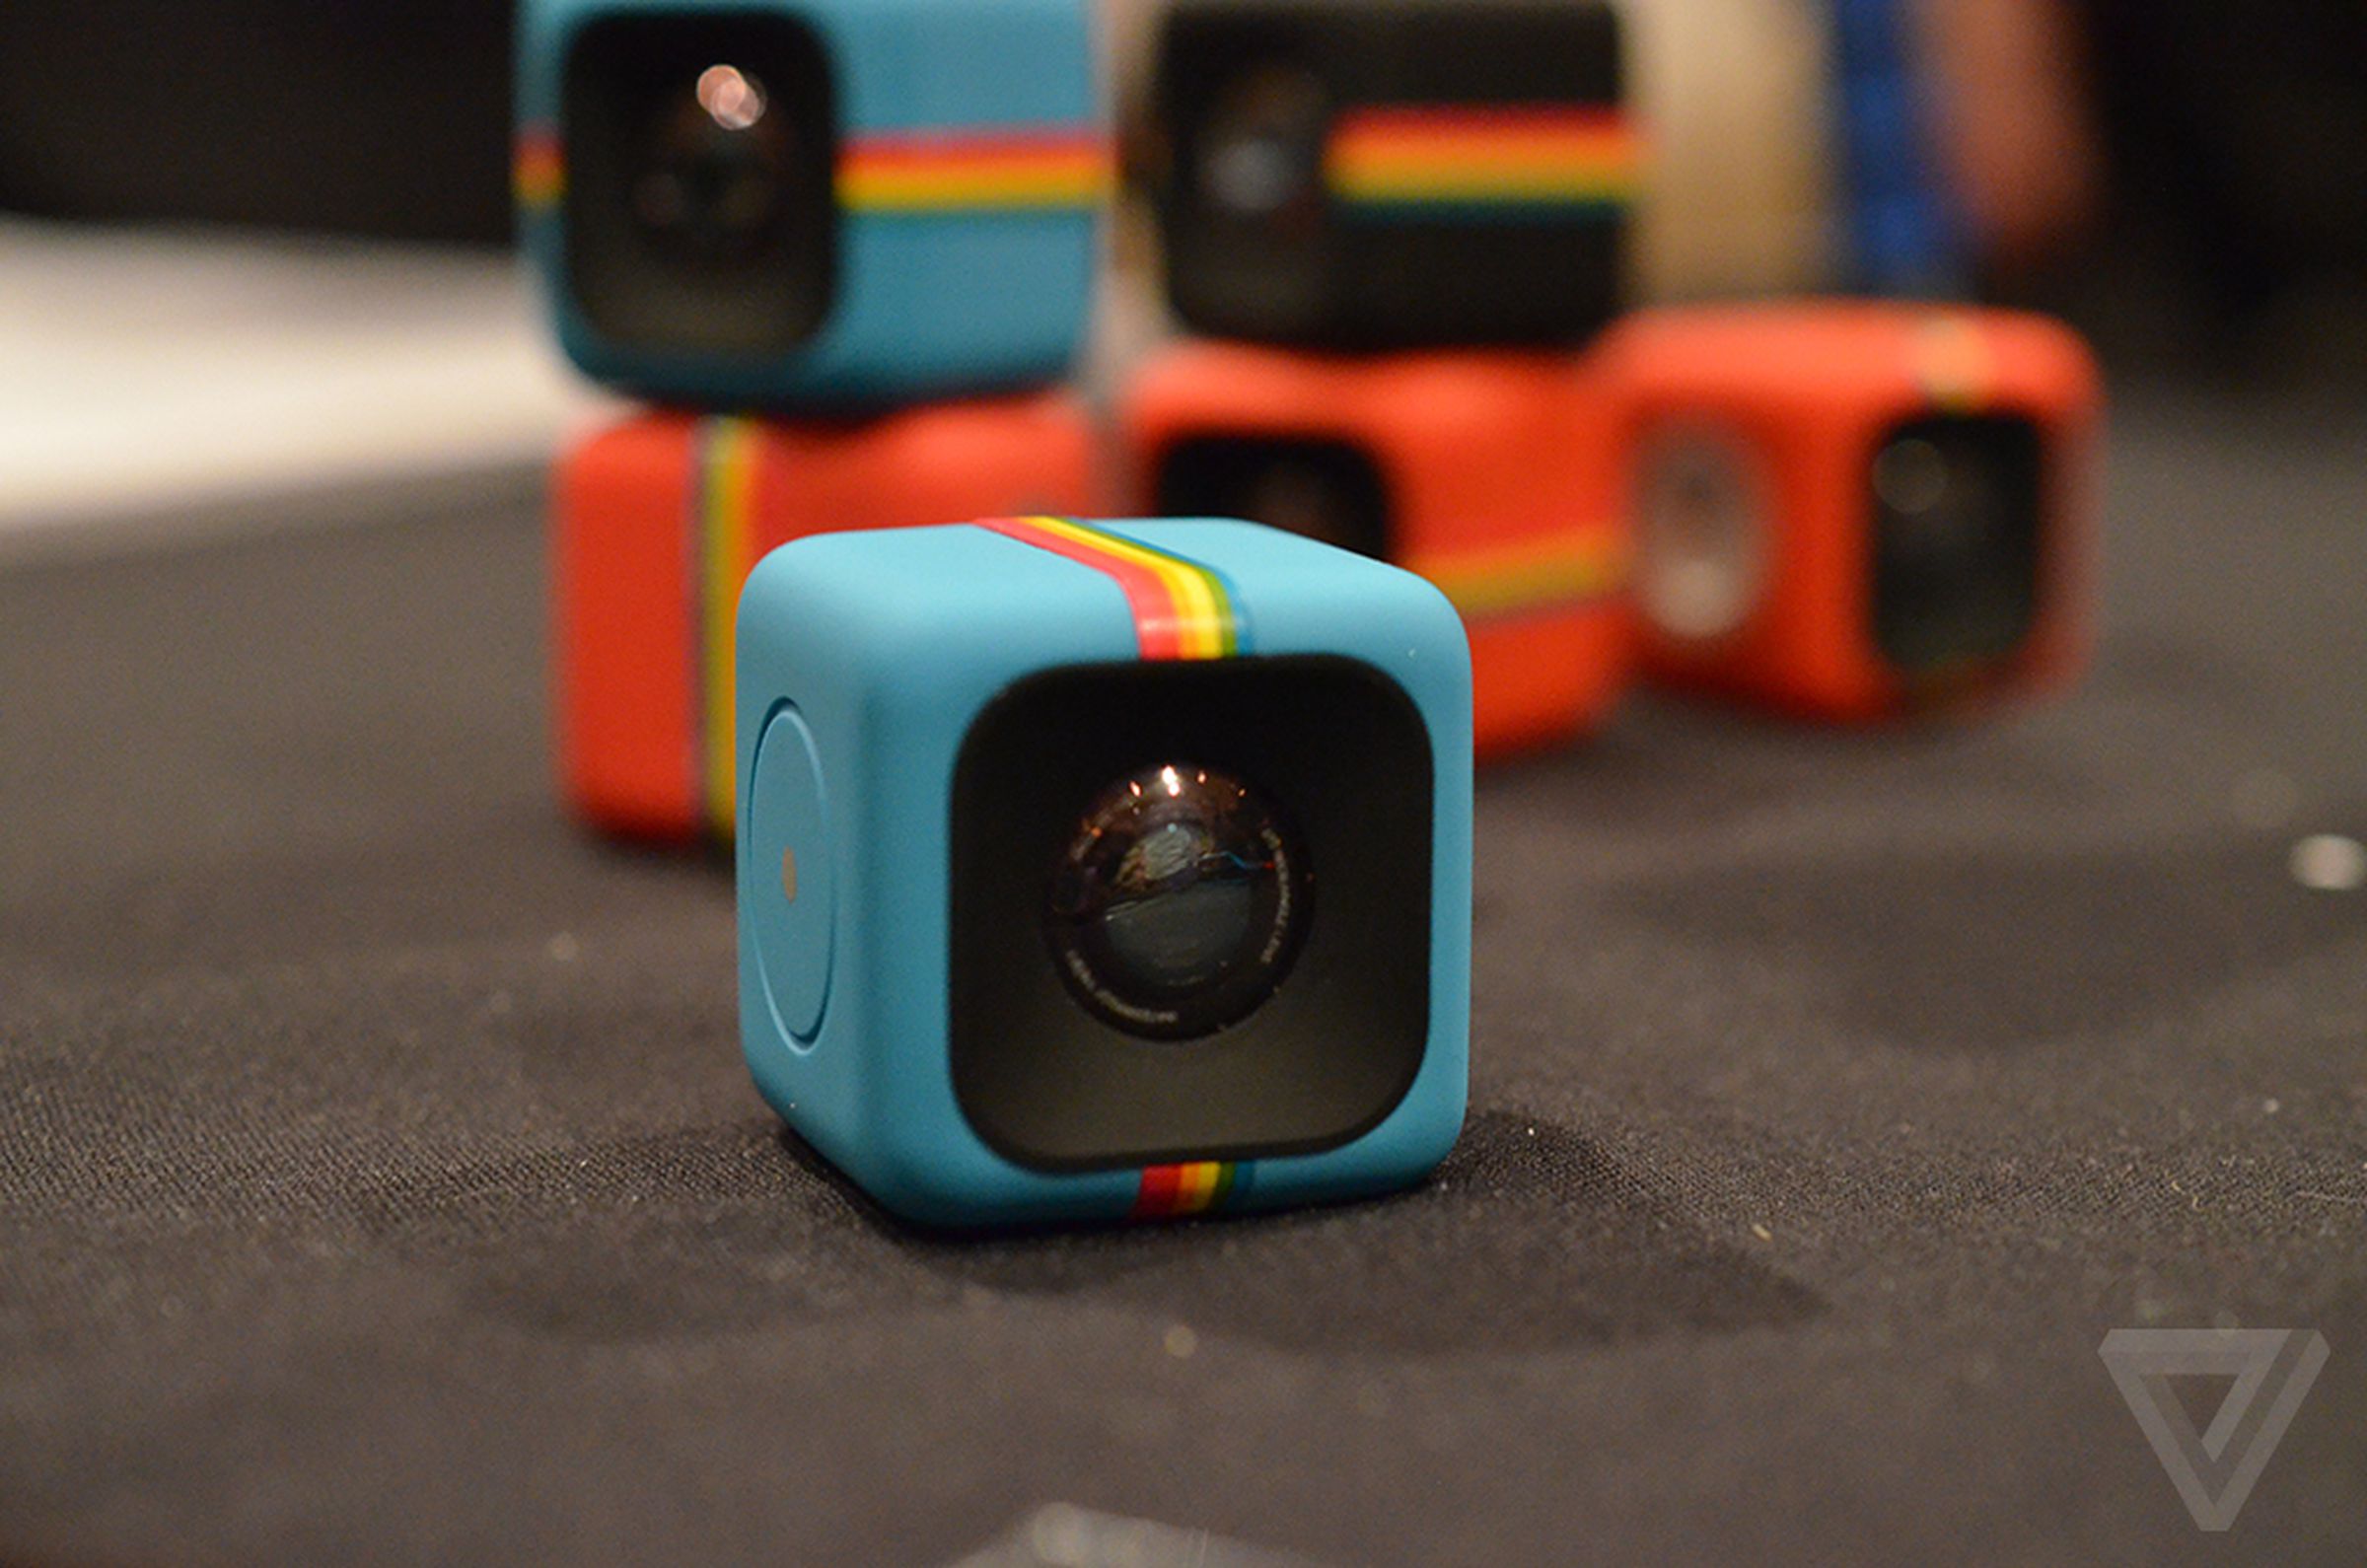 Polaroid C3 Action Sports video camera hands-on images